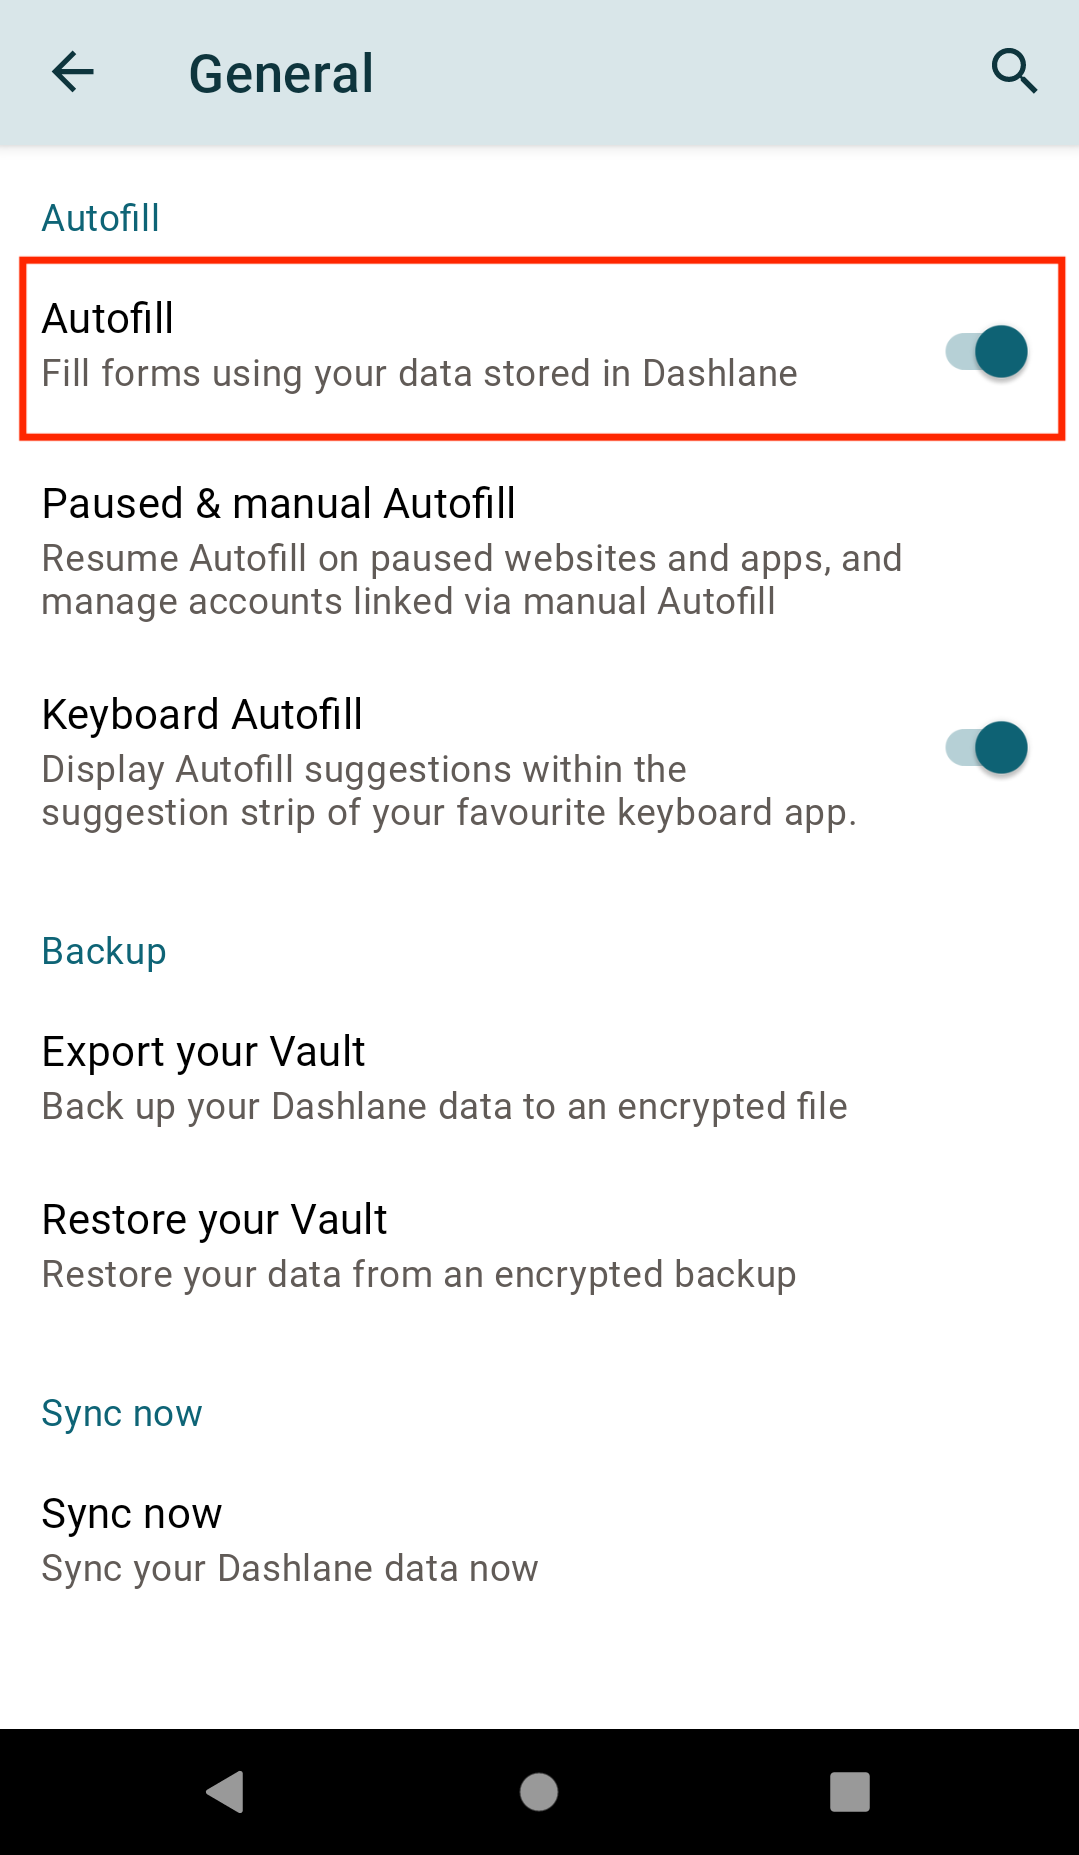 enable autofill on devices running Android 11